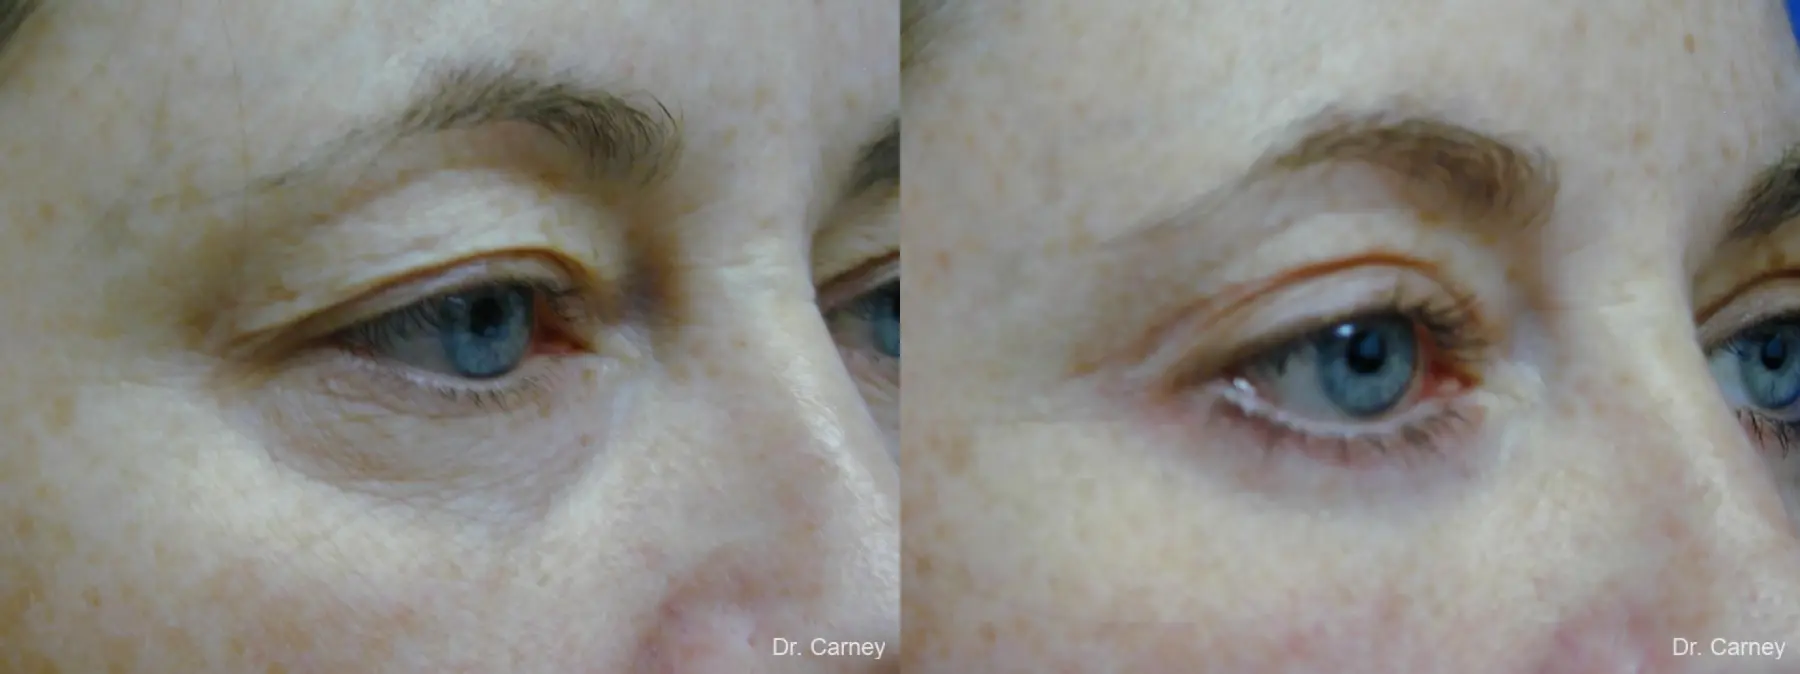 Virginia Beach Eyelid Lift 1138 - Before and After 2